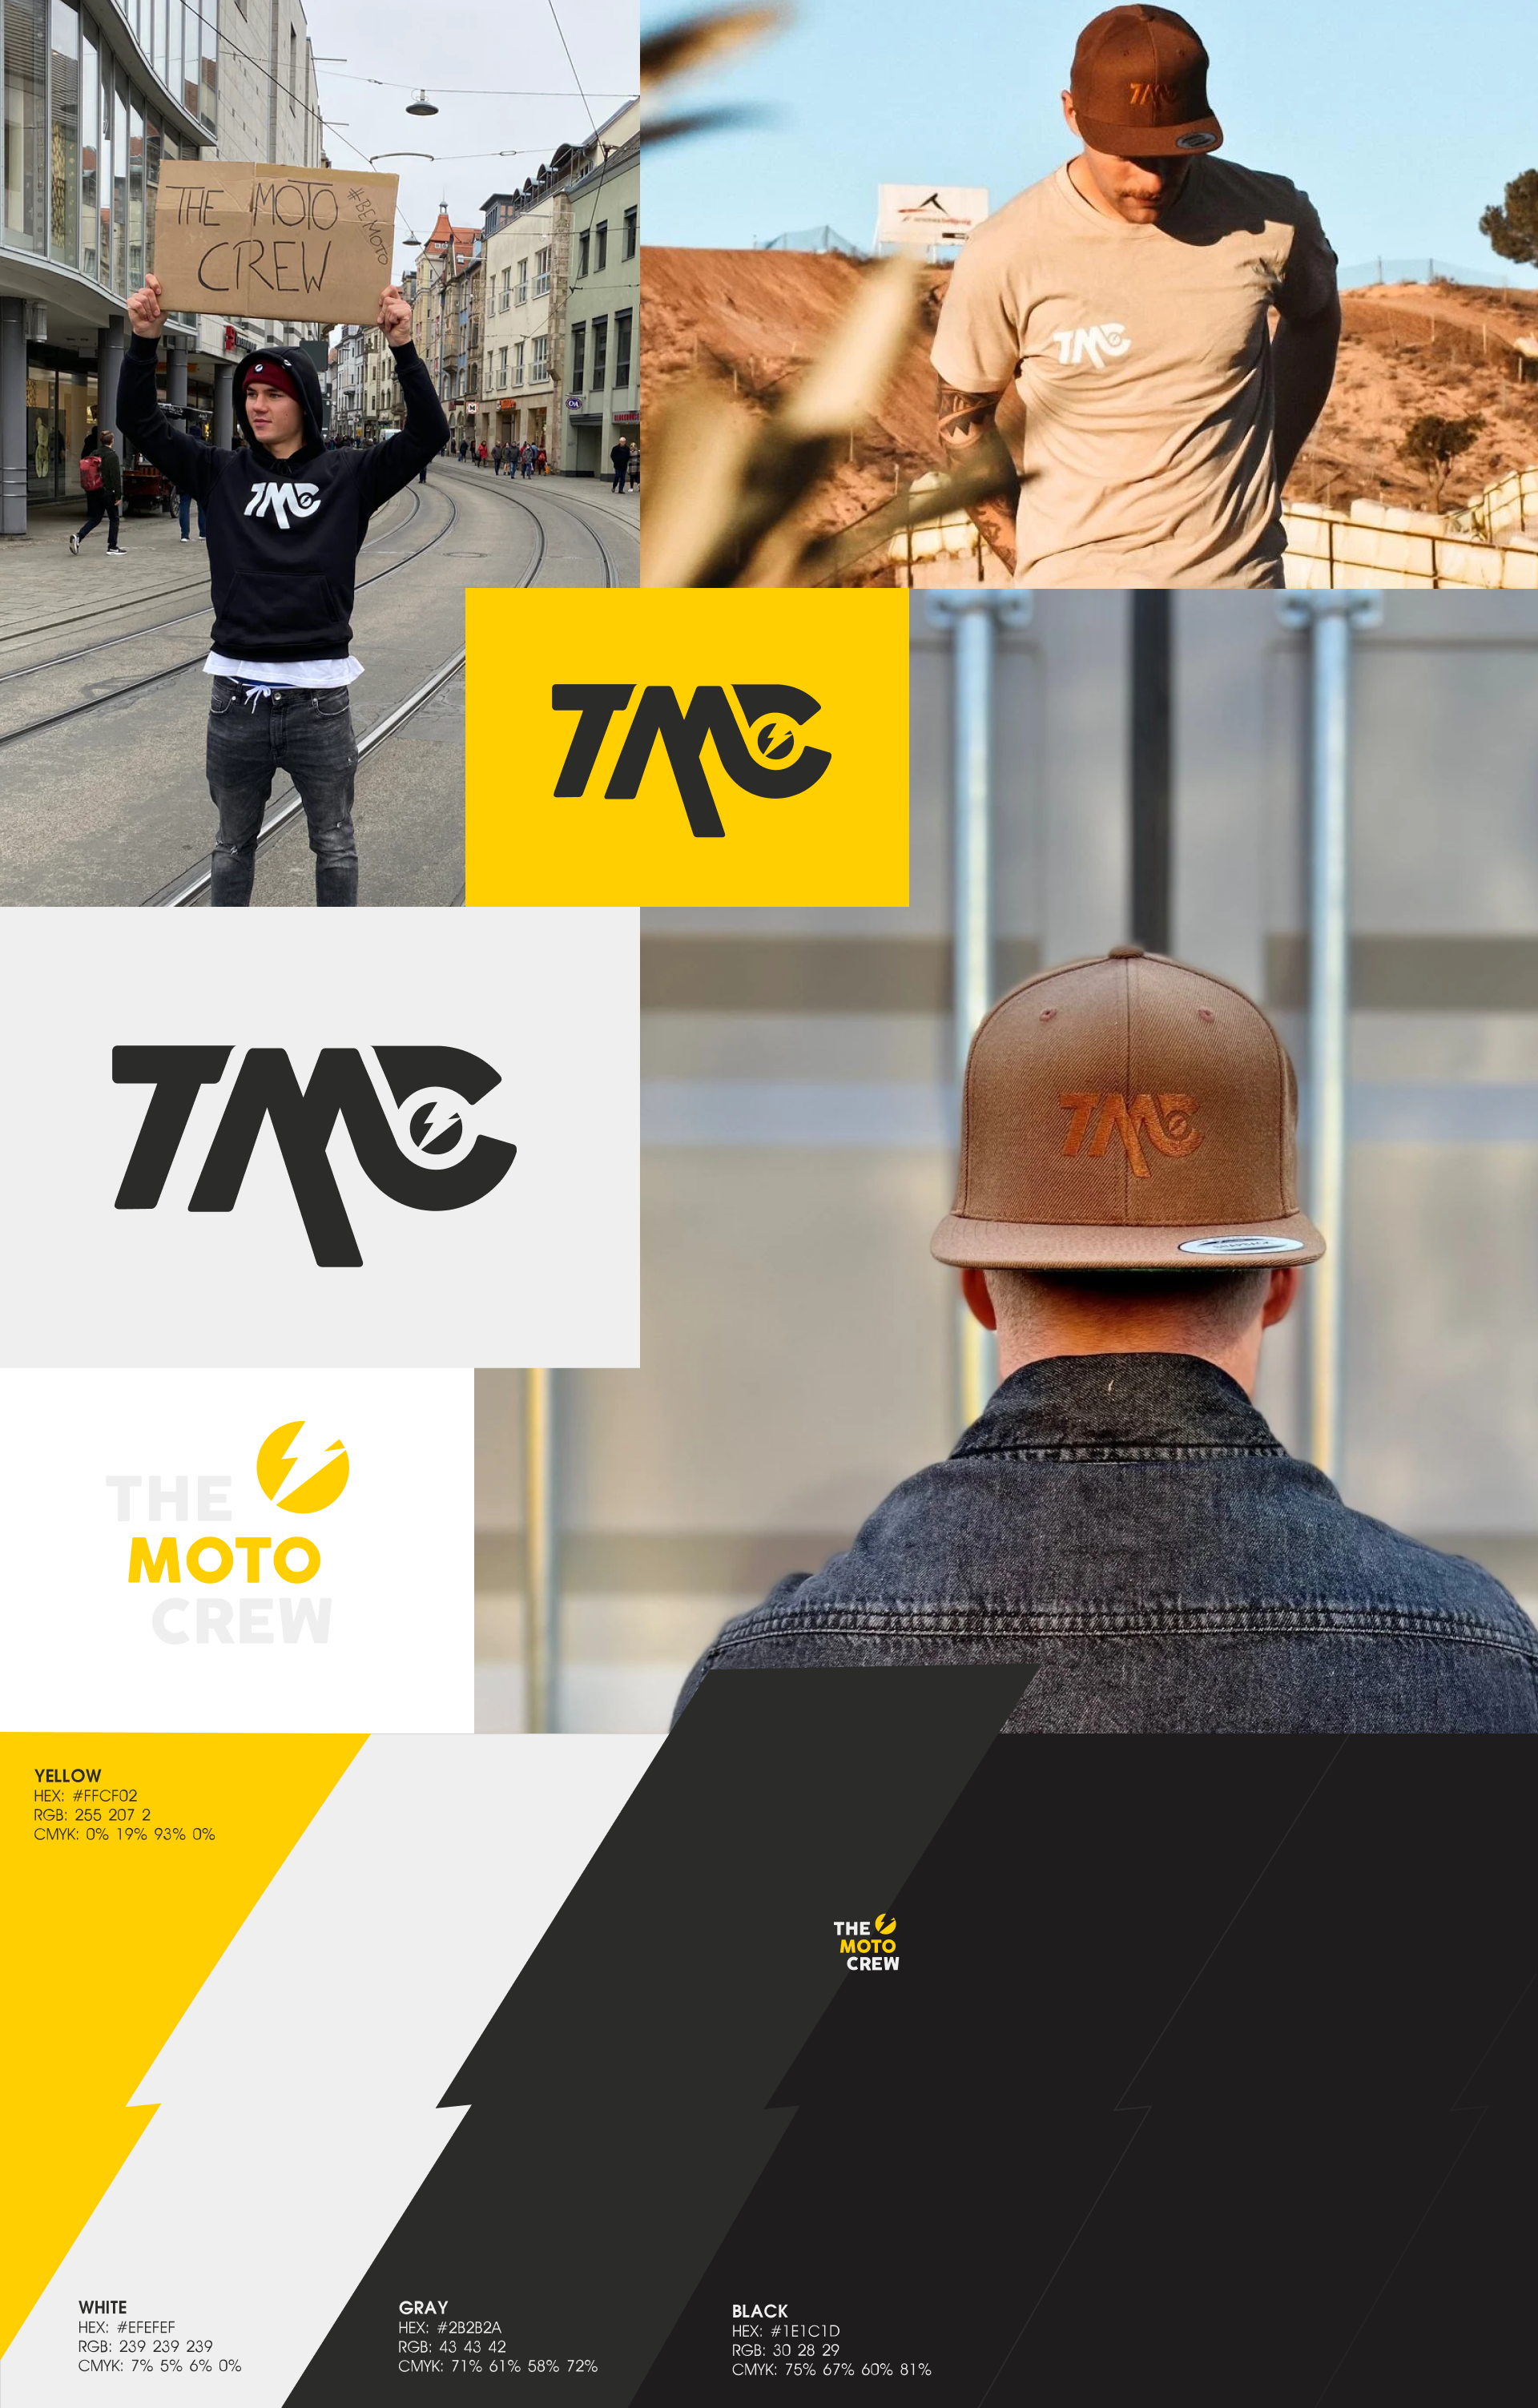 The Moto Crew - Branding - Images and Colors